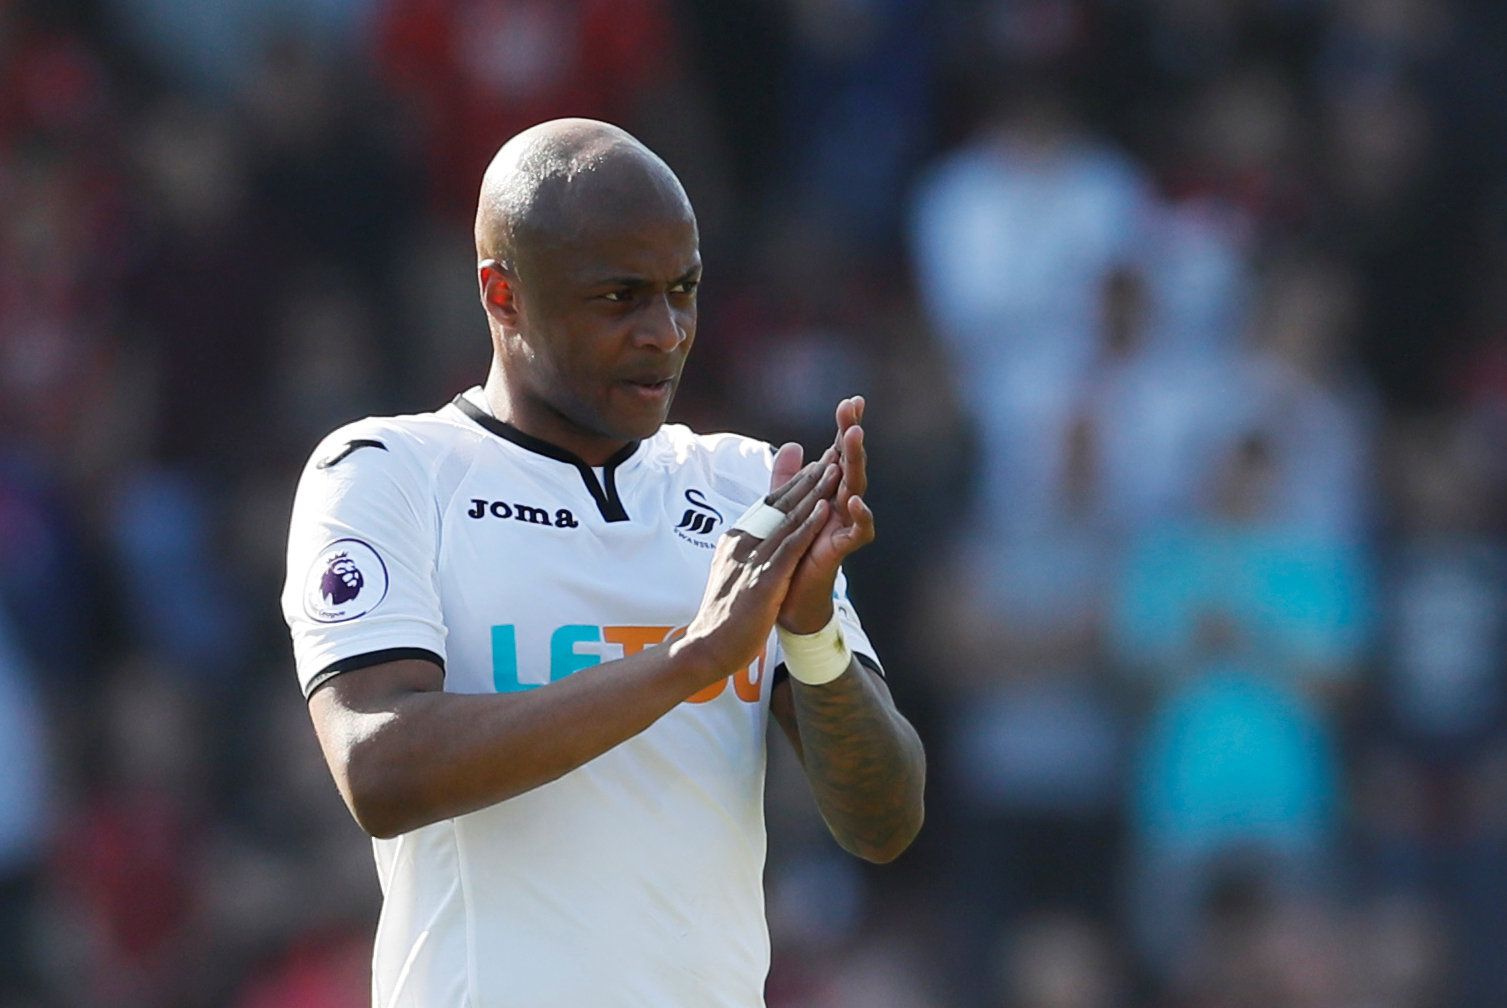 Soccer Football - Premier League - AFC Bournemouth vs Swansea City - Vitality Stadium, Bournemouth, Britain - May 5, 2018   Swansea City's Andre Ayew looks dejected after the match               REUTERS/David Klein    EDITORIAL USE ONLY. No use with unauthorized audio, video, data, fixture lists, club/league logos or 